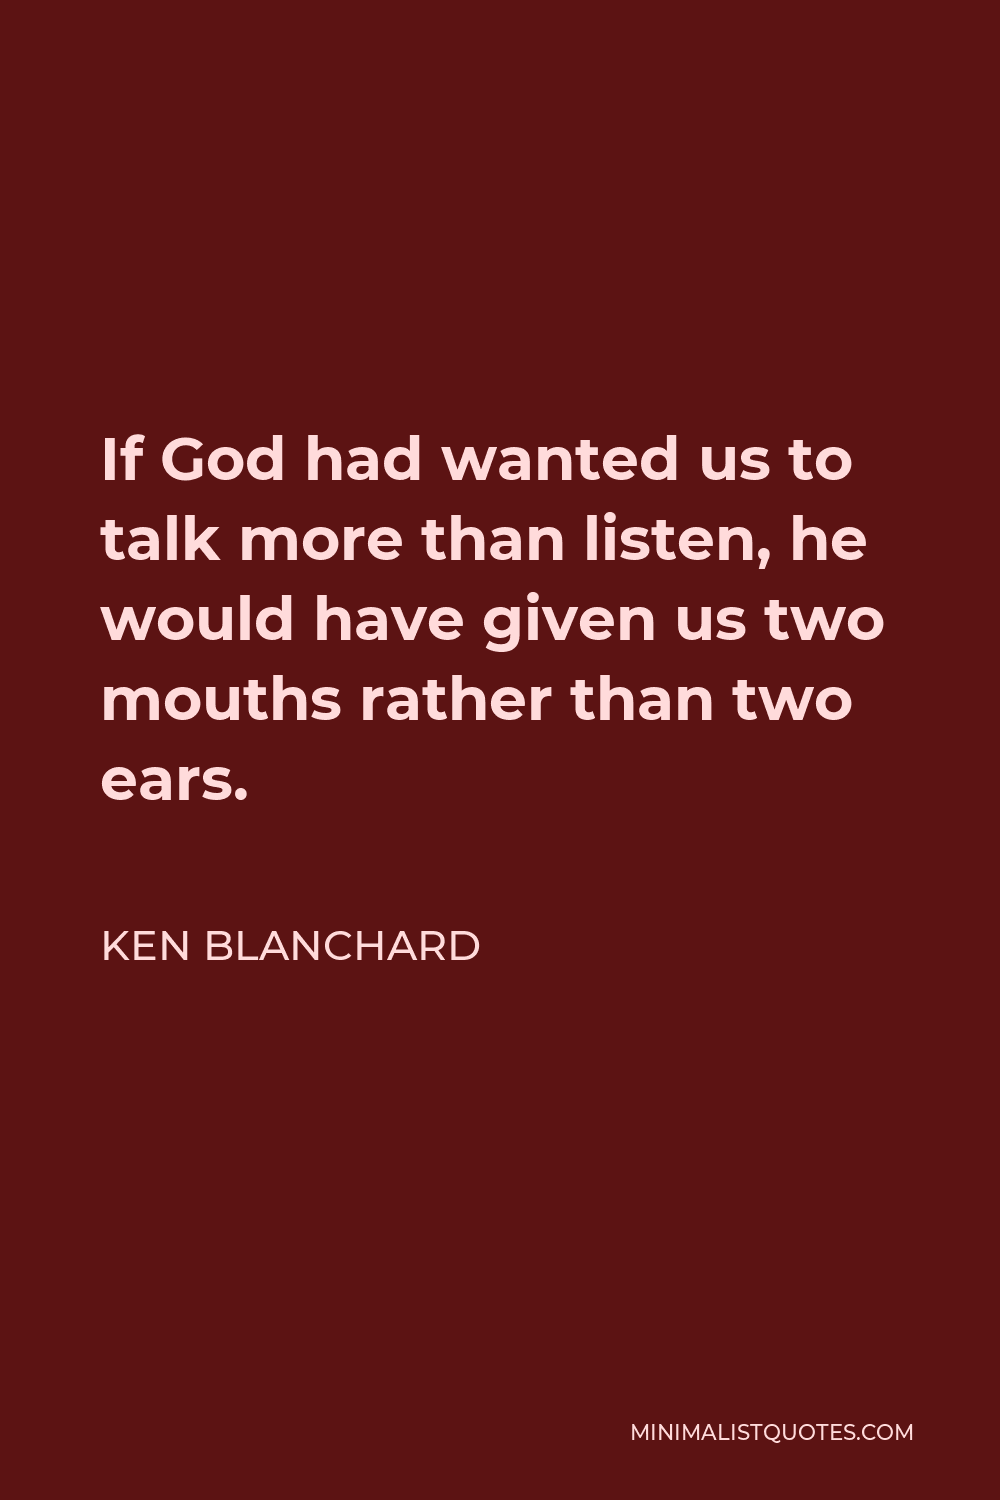 Ken Blanchard Quote - If God had wanted us to talk more than listen, he would have given us two mouths rather than two ears.